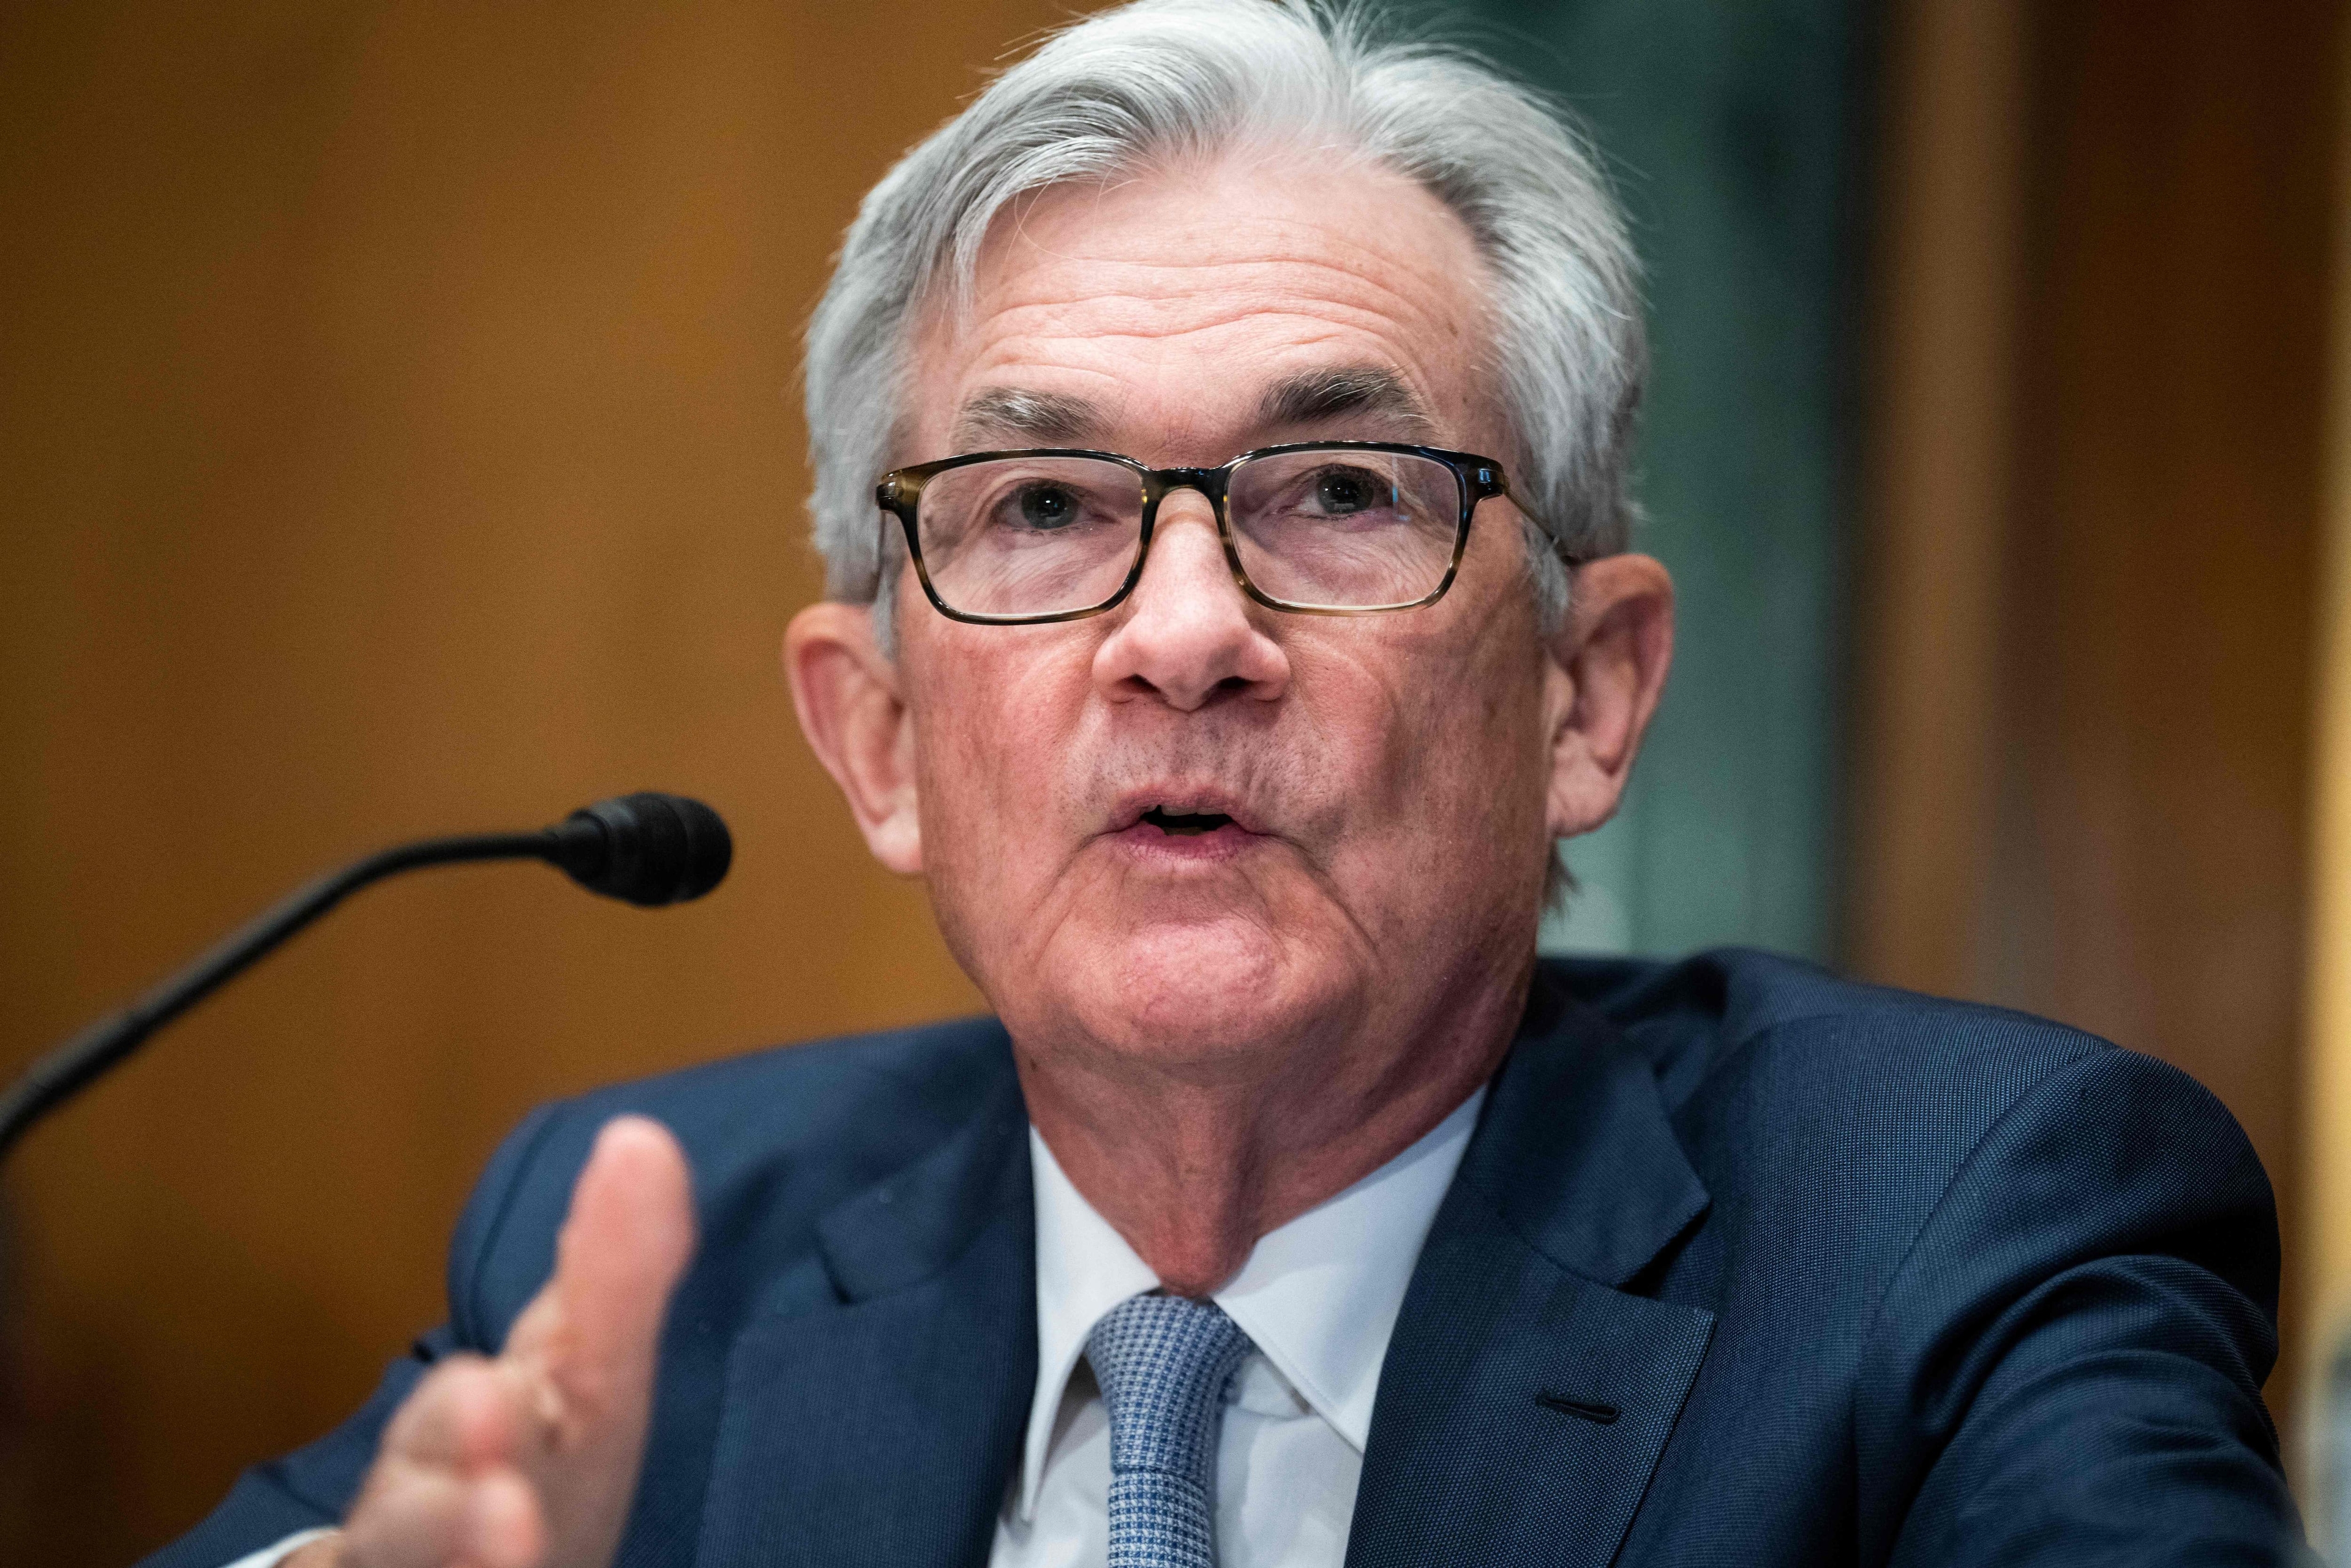 Fed Chair Jerome Powell made it clear the central bank was likely to lift its federal fund's rate by 25 basis points at the end of its March 15-16 policy meeting.